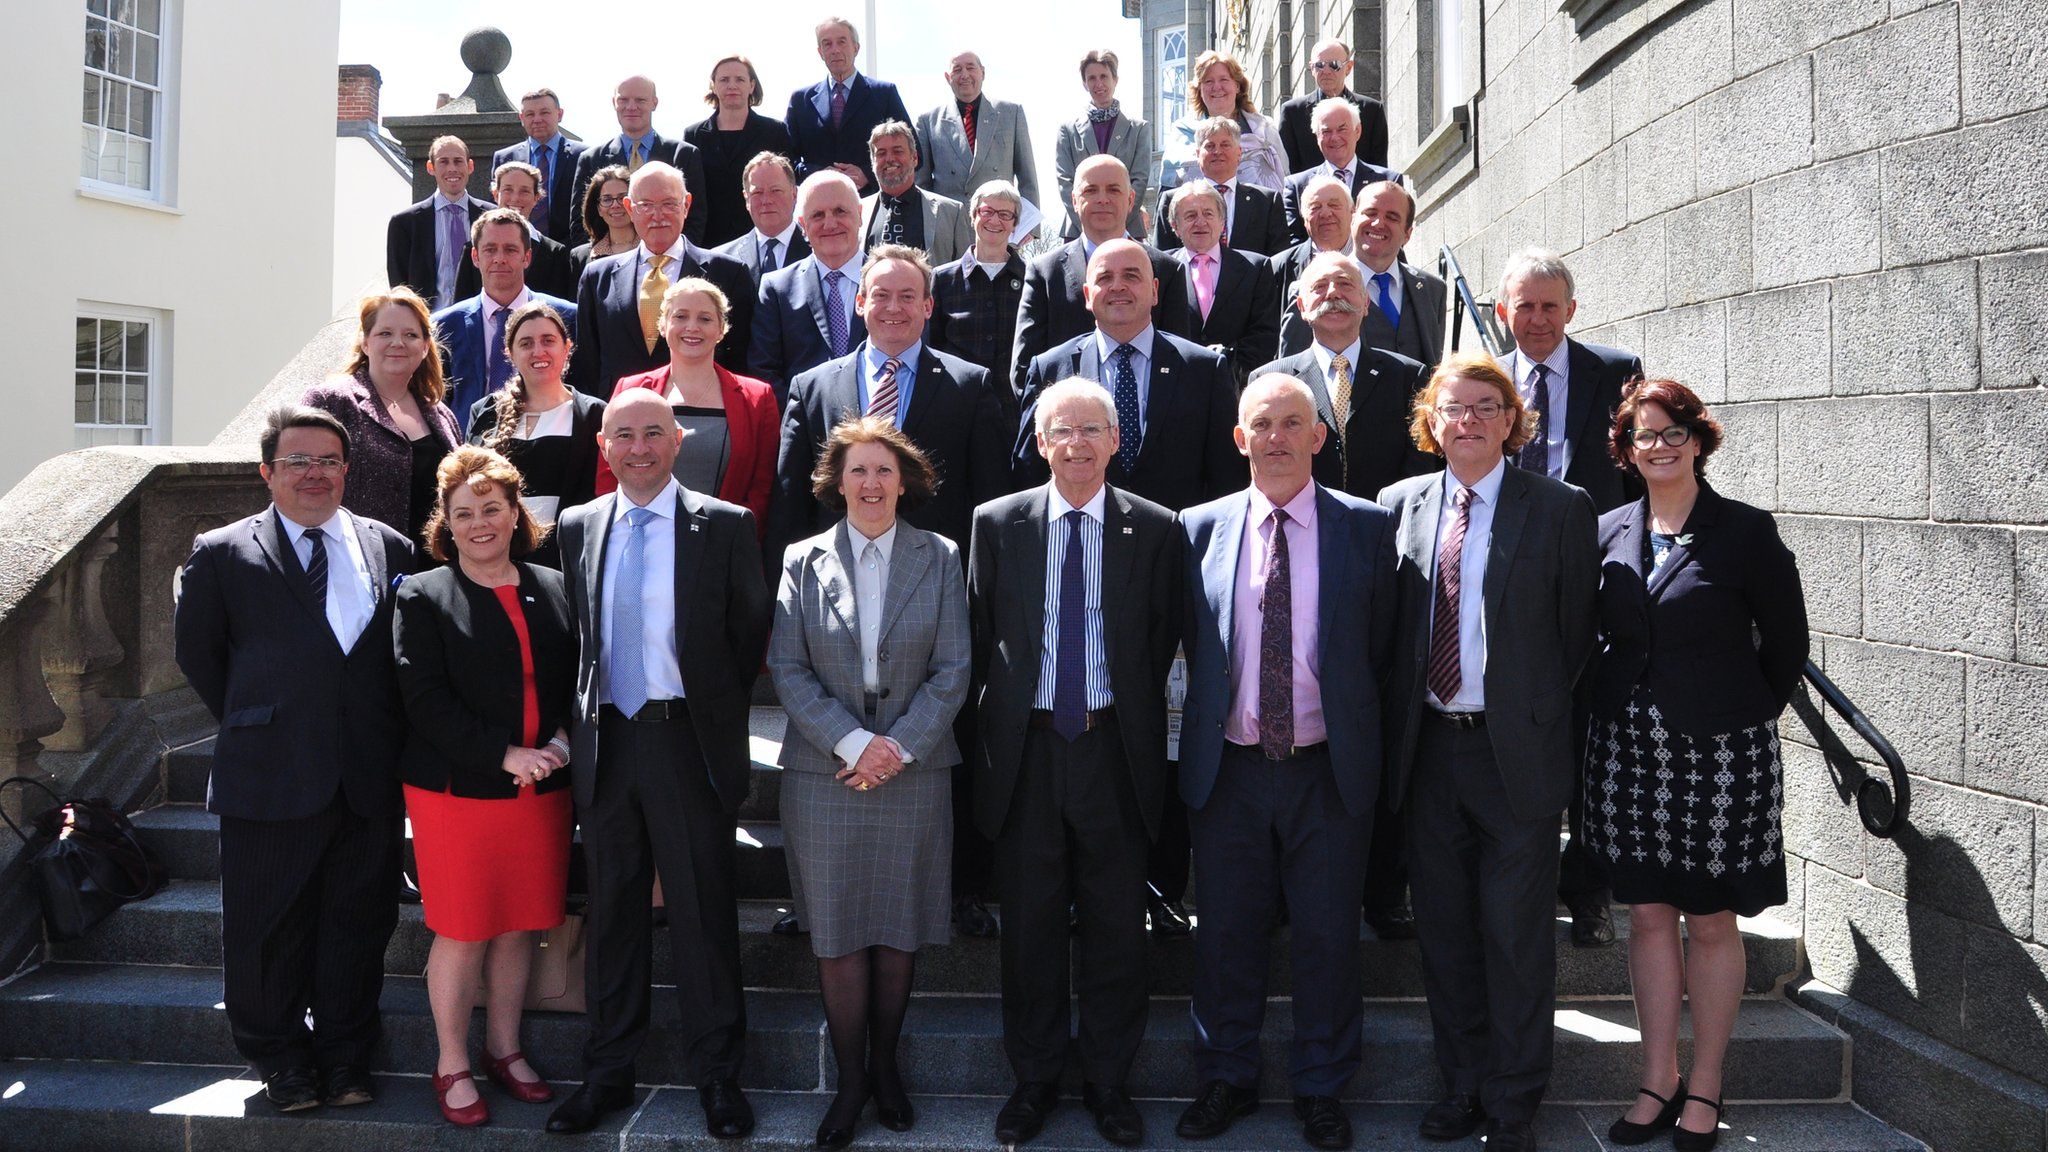 The 38 successful Guernsey election candidates on the steps of the States building